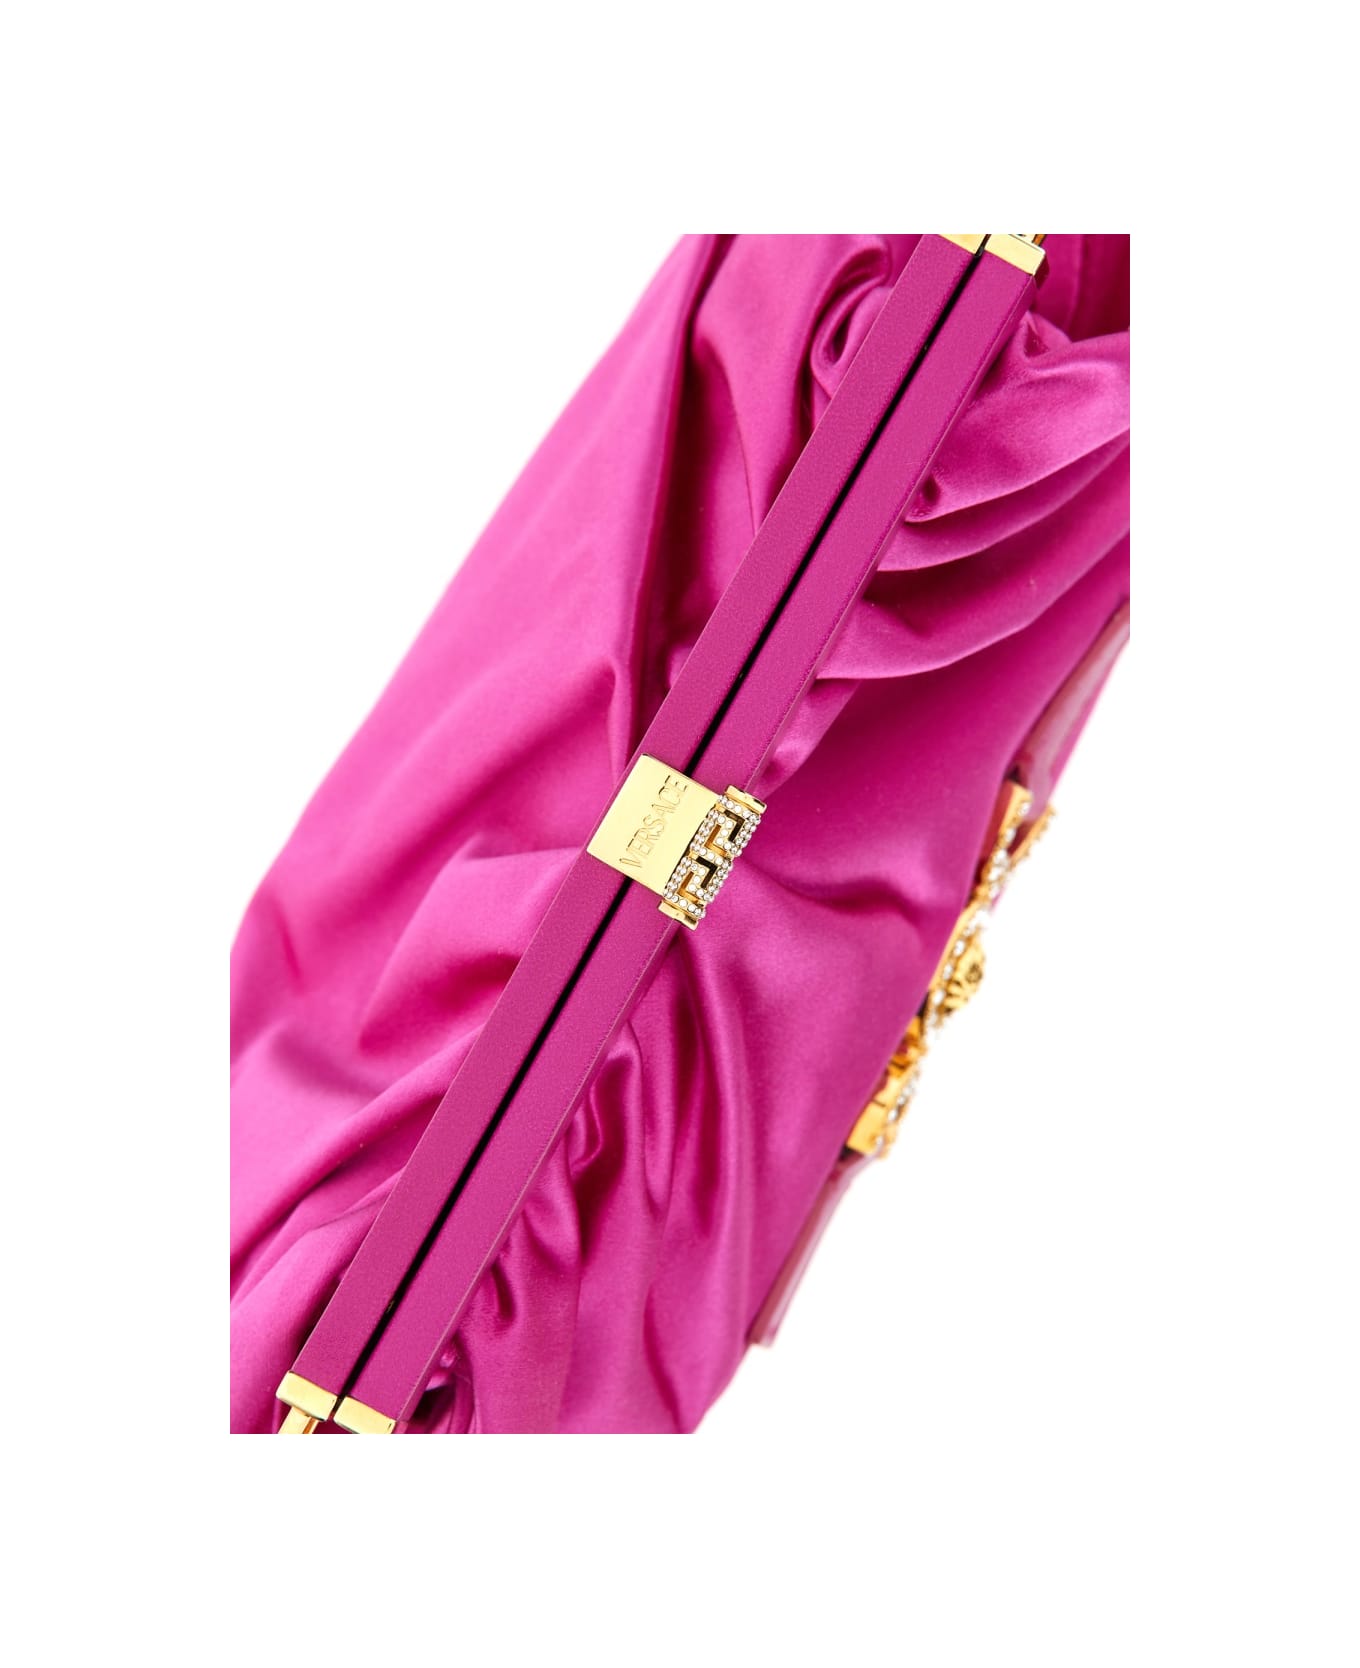 Versace Clutch With Medusa Plaque - FUCHSIA クラッチバッグ